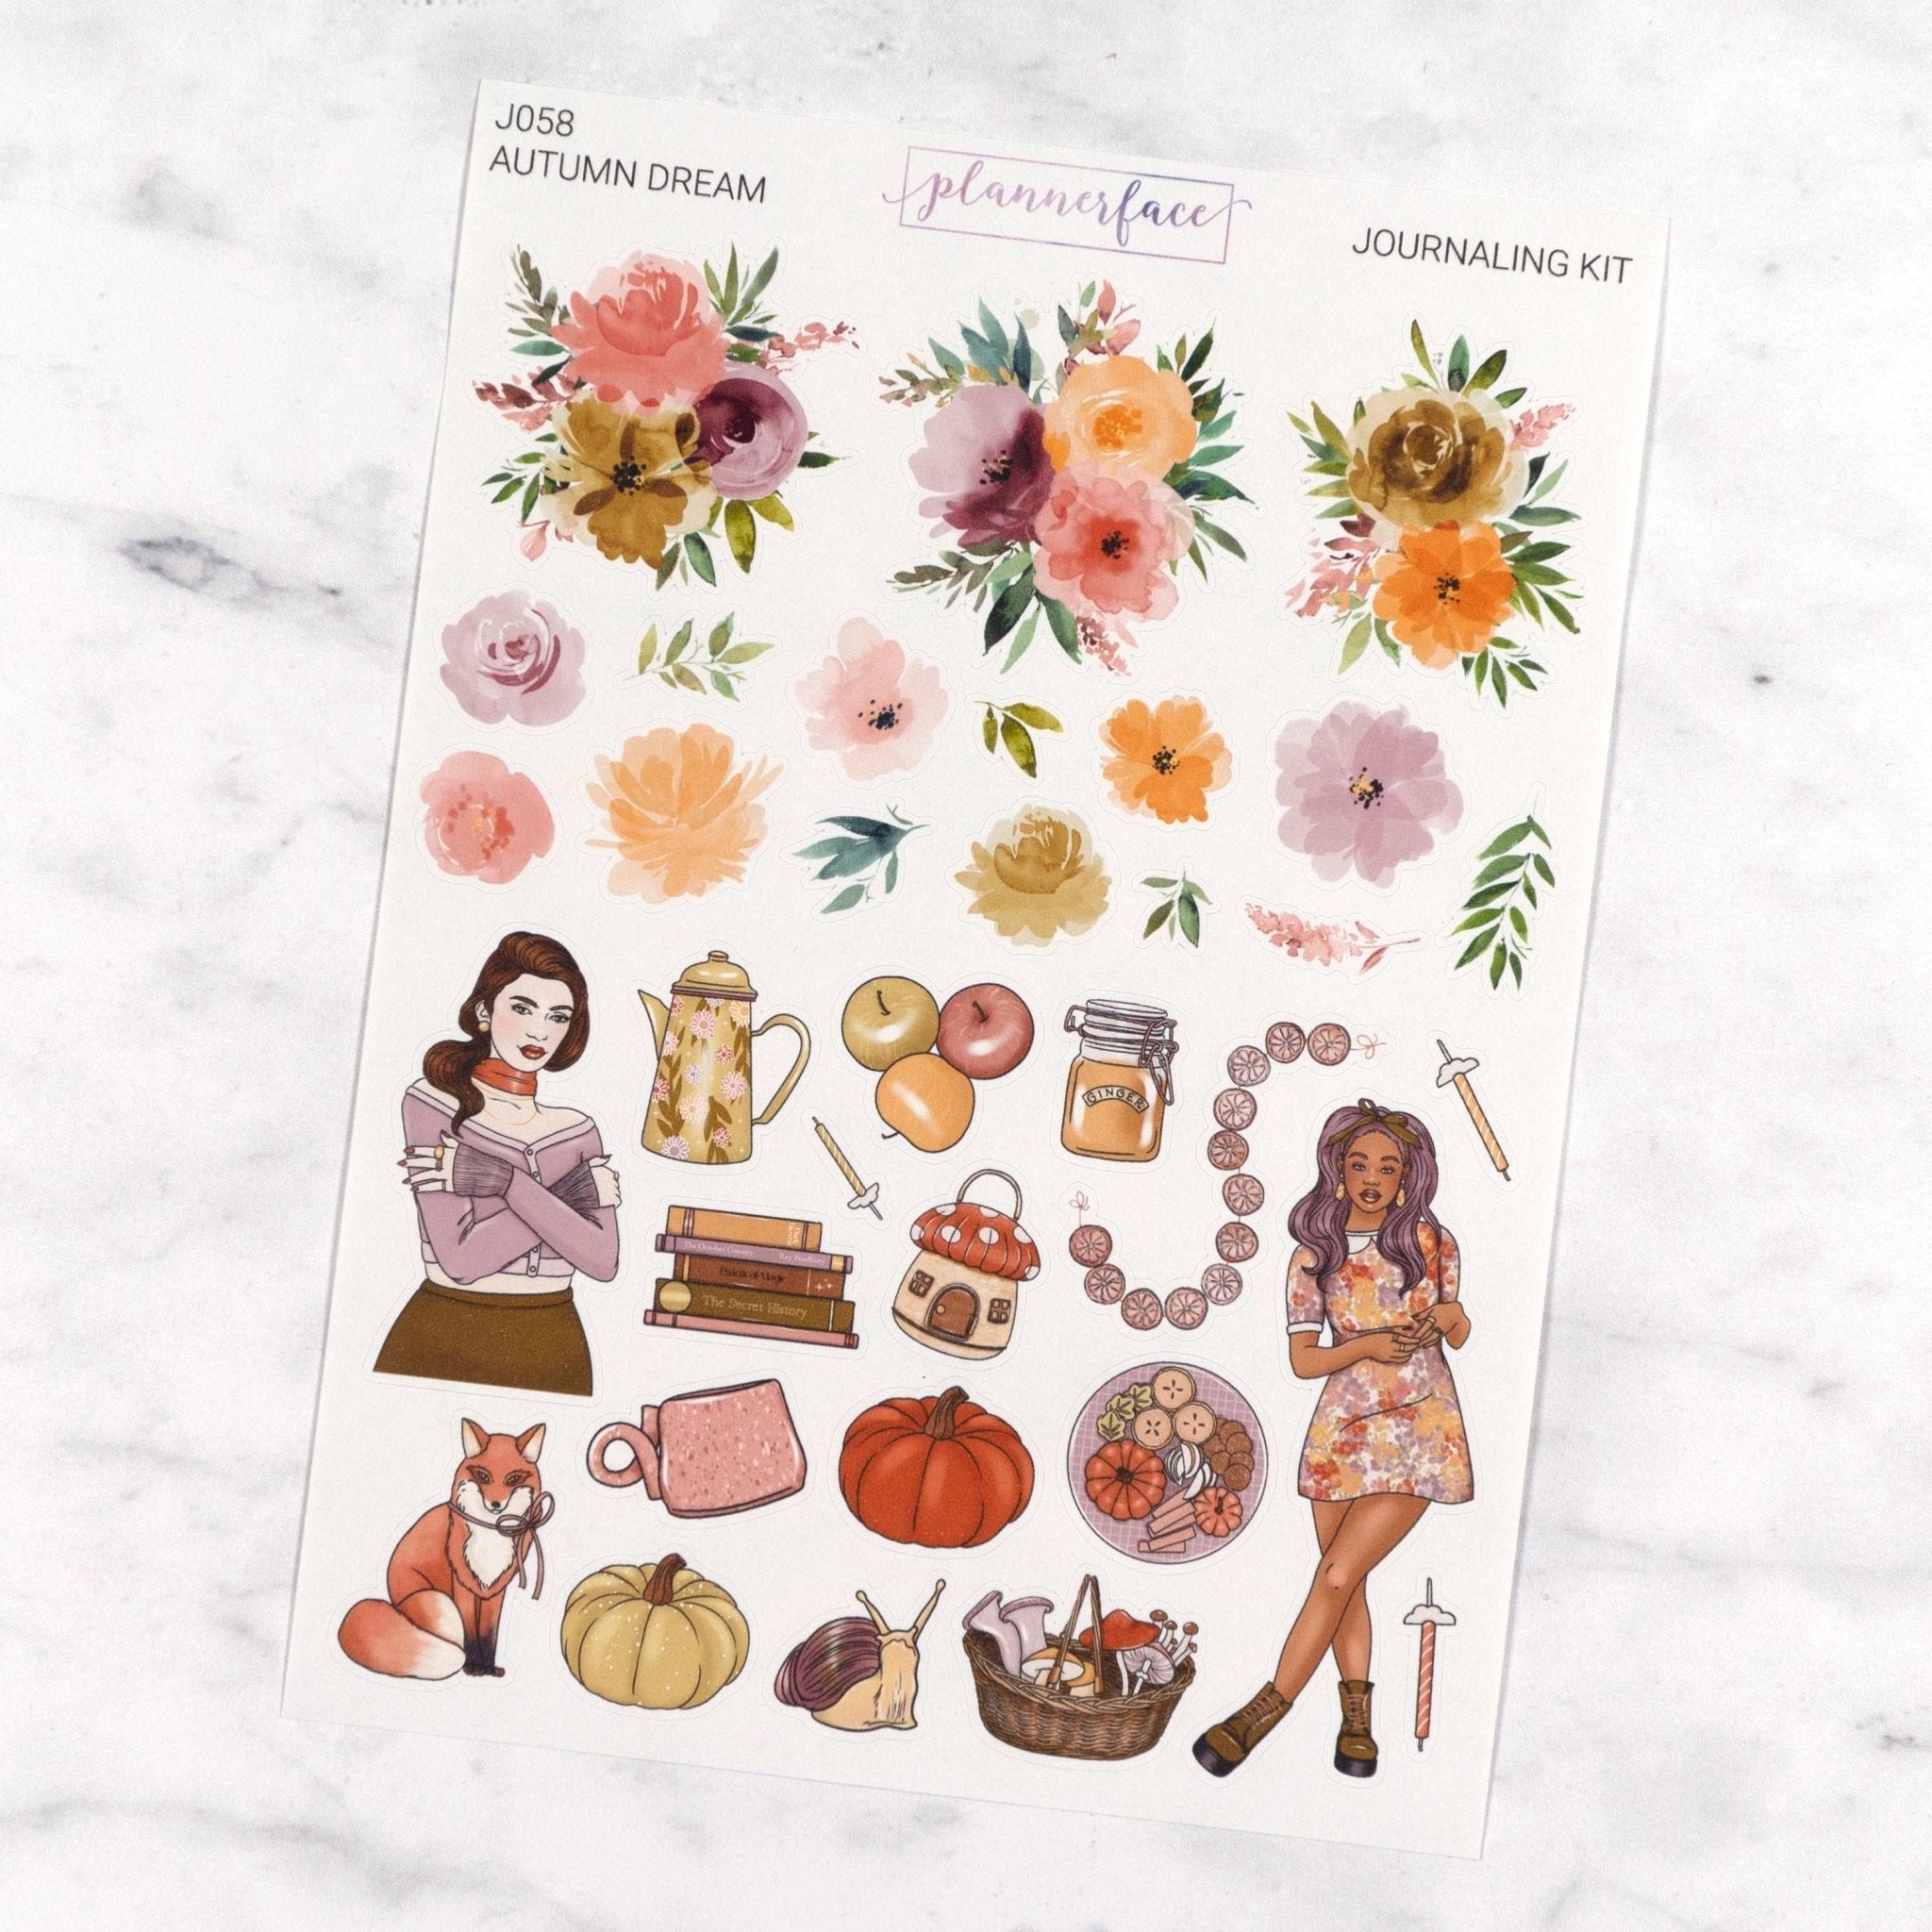 Autumn Dream | Journaling Kit by Plannerface